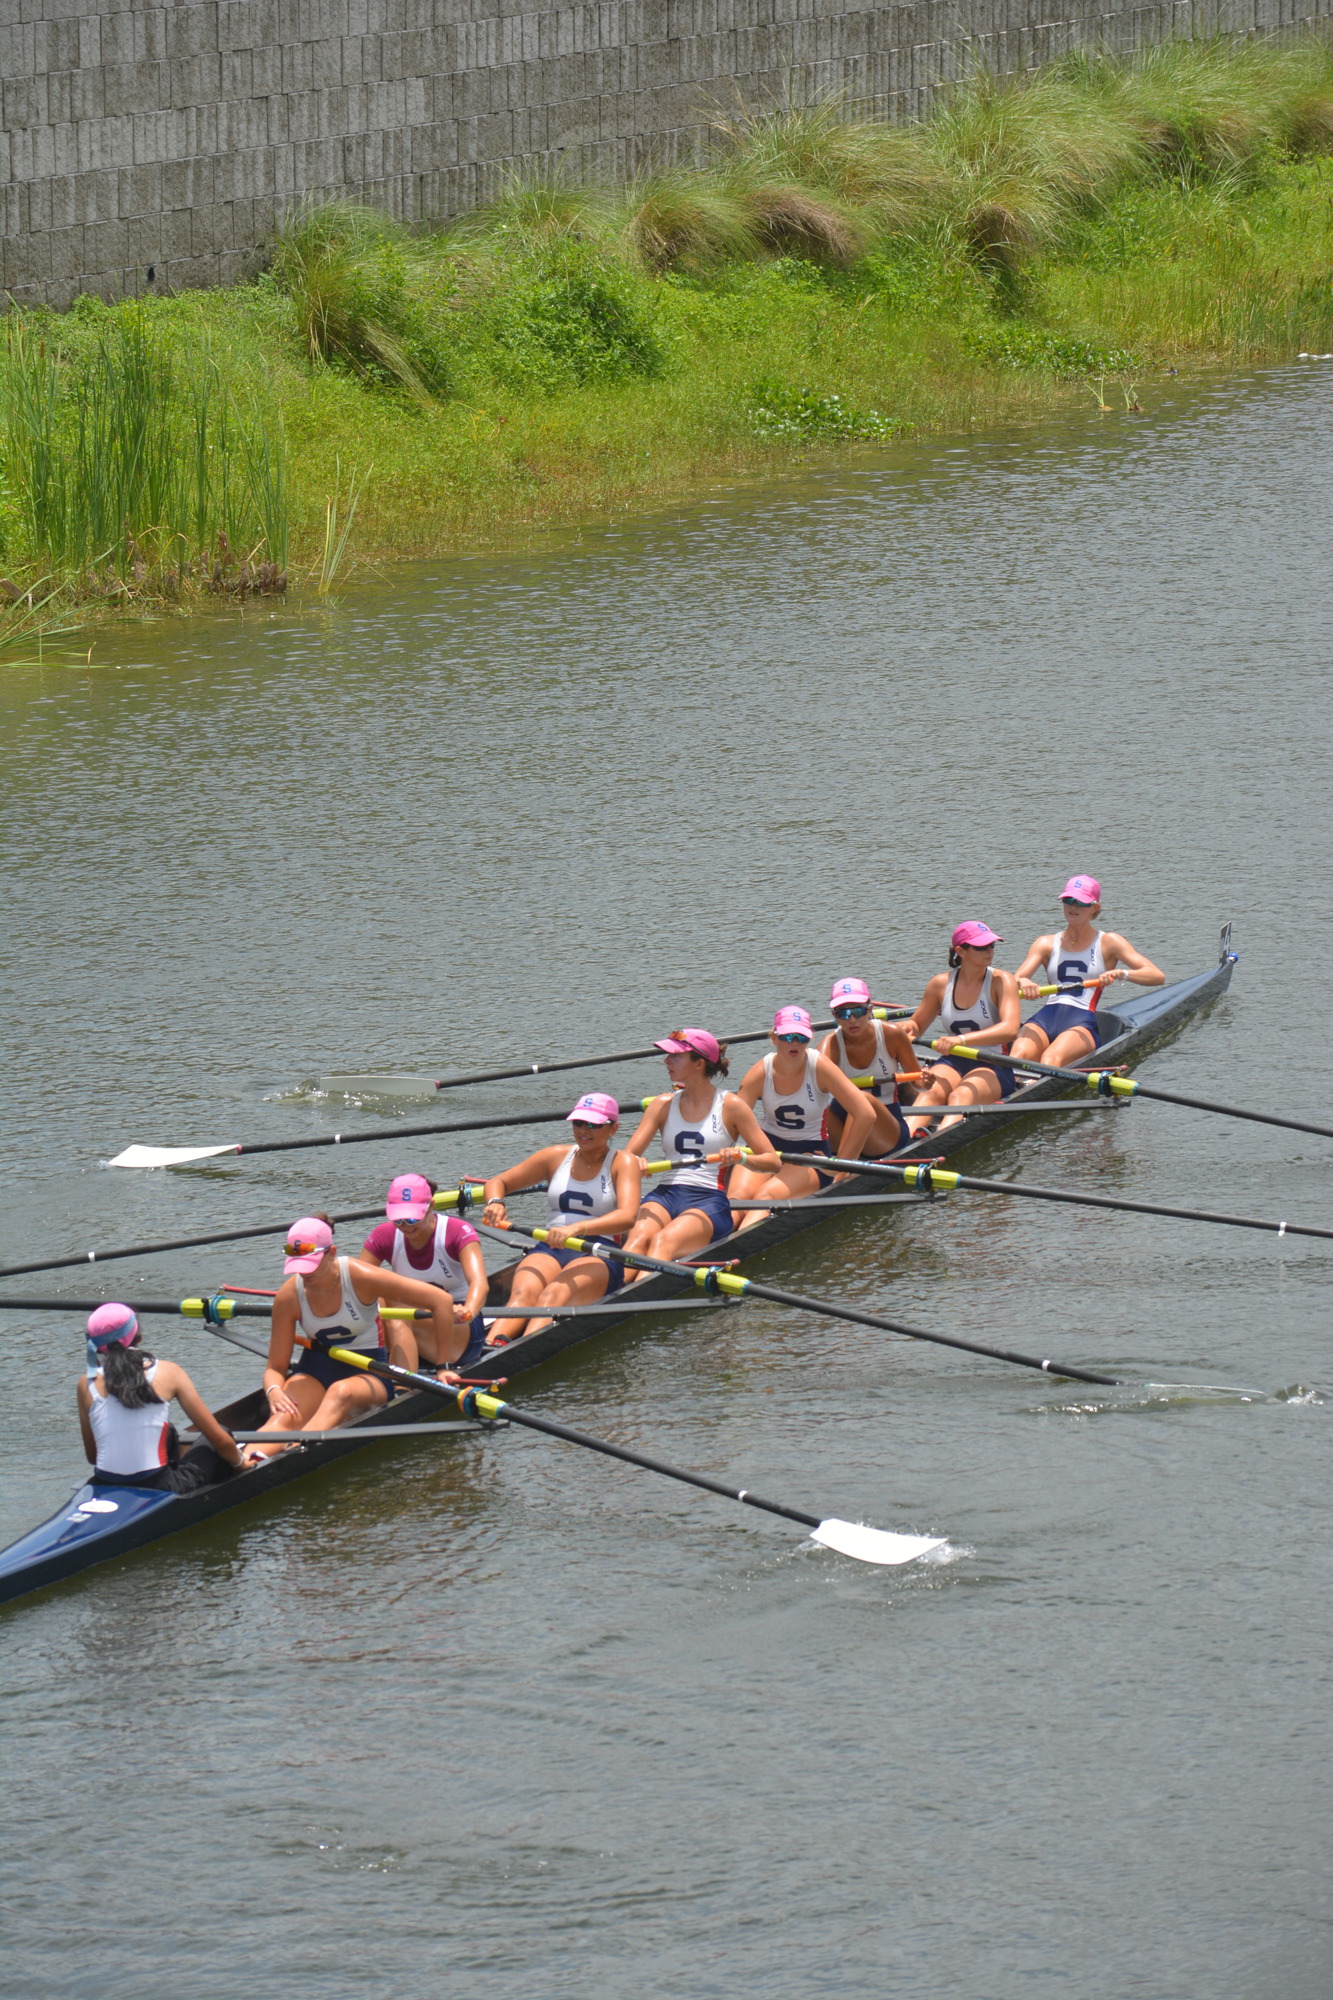 Sophia Stock (right) and her Women's Youth Second Varsity 8+ teammates row back to the dock after finishing  fourth (7:04.09) in the B Final at the 2022 USRowing Youth National Championships.